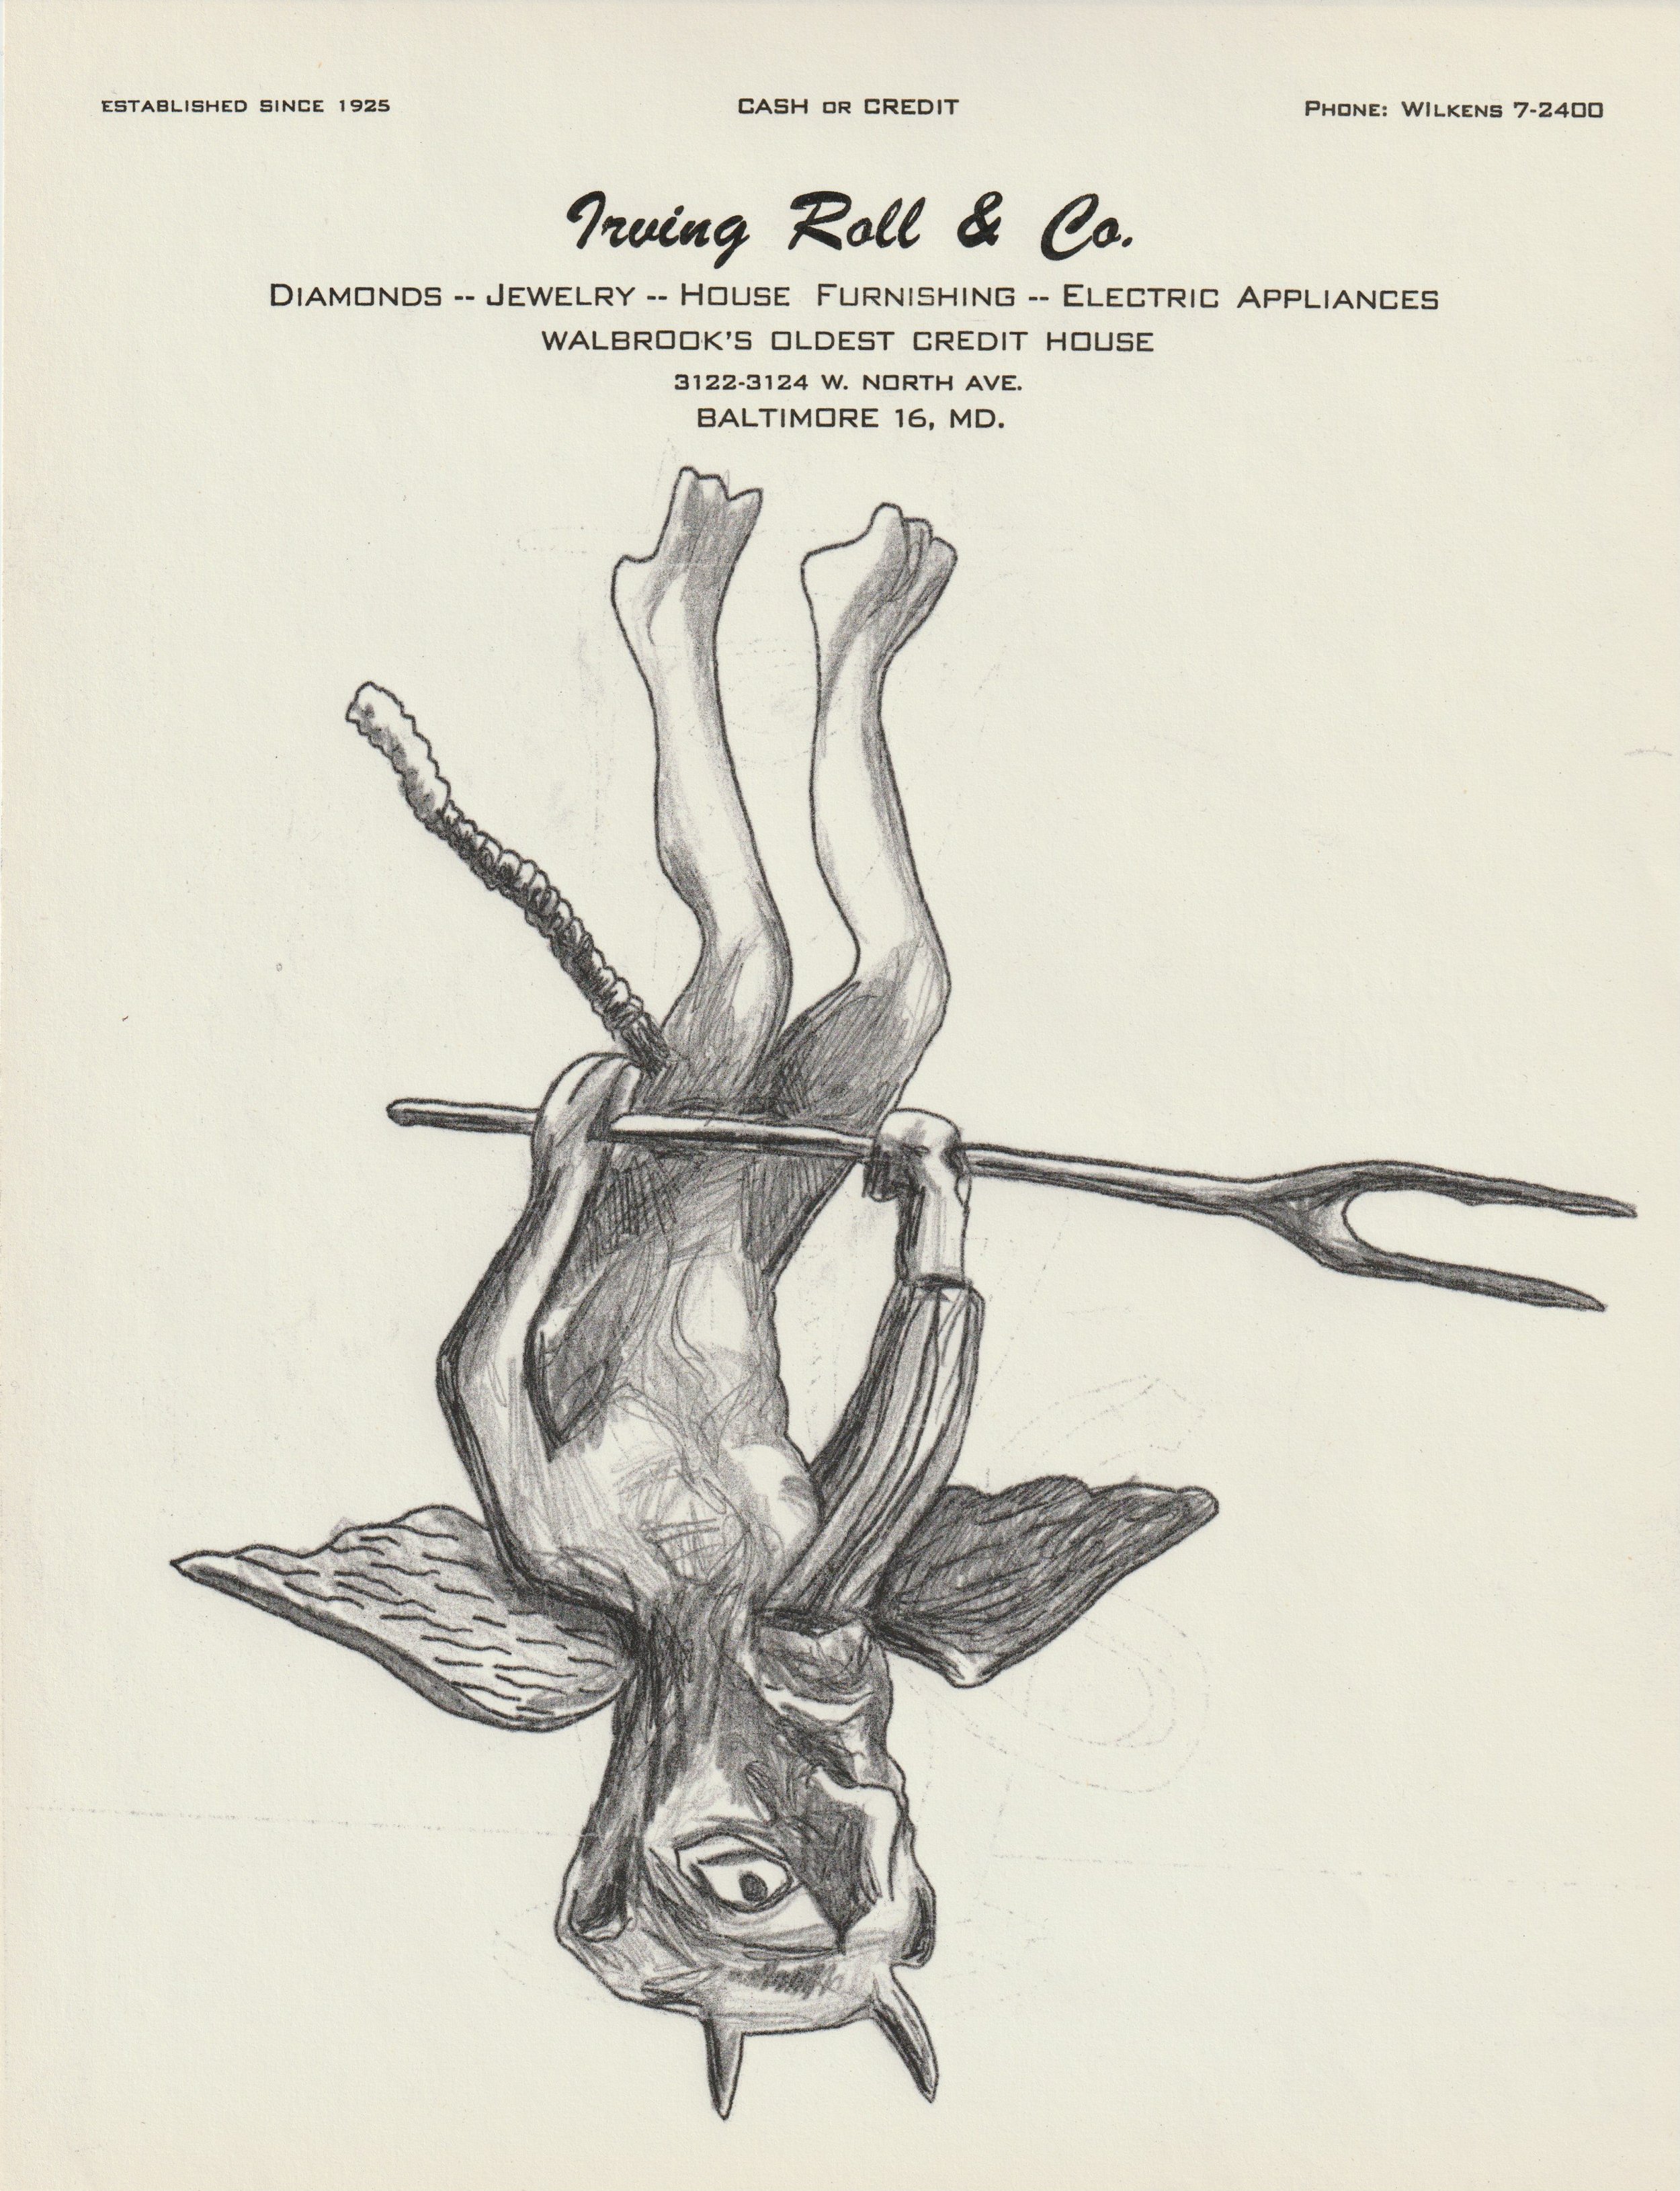  Untitled, 2021 Graphite transfer drawing on 1960’s pawnshop letterhead paper 11 x 8.5 inches 